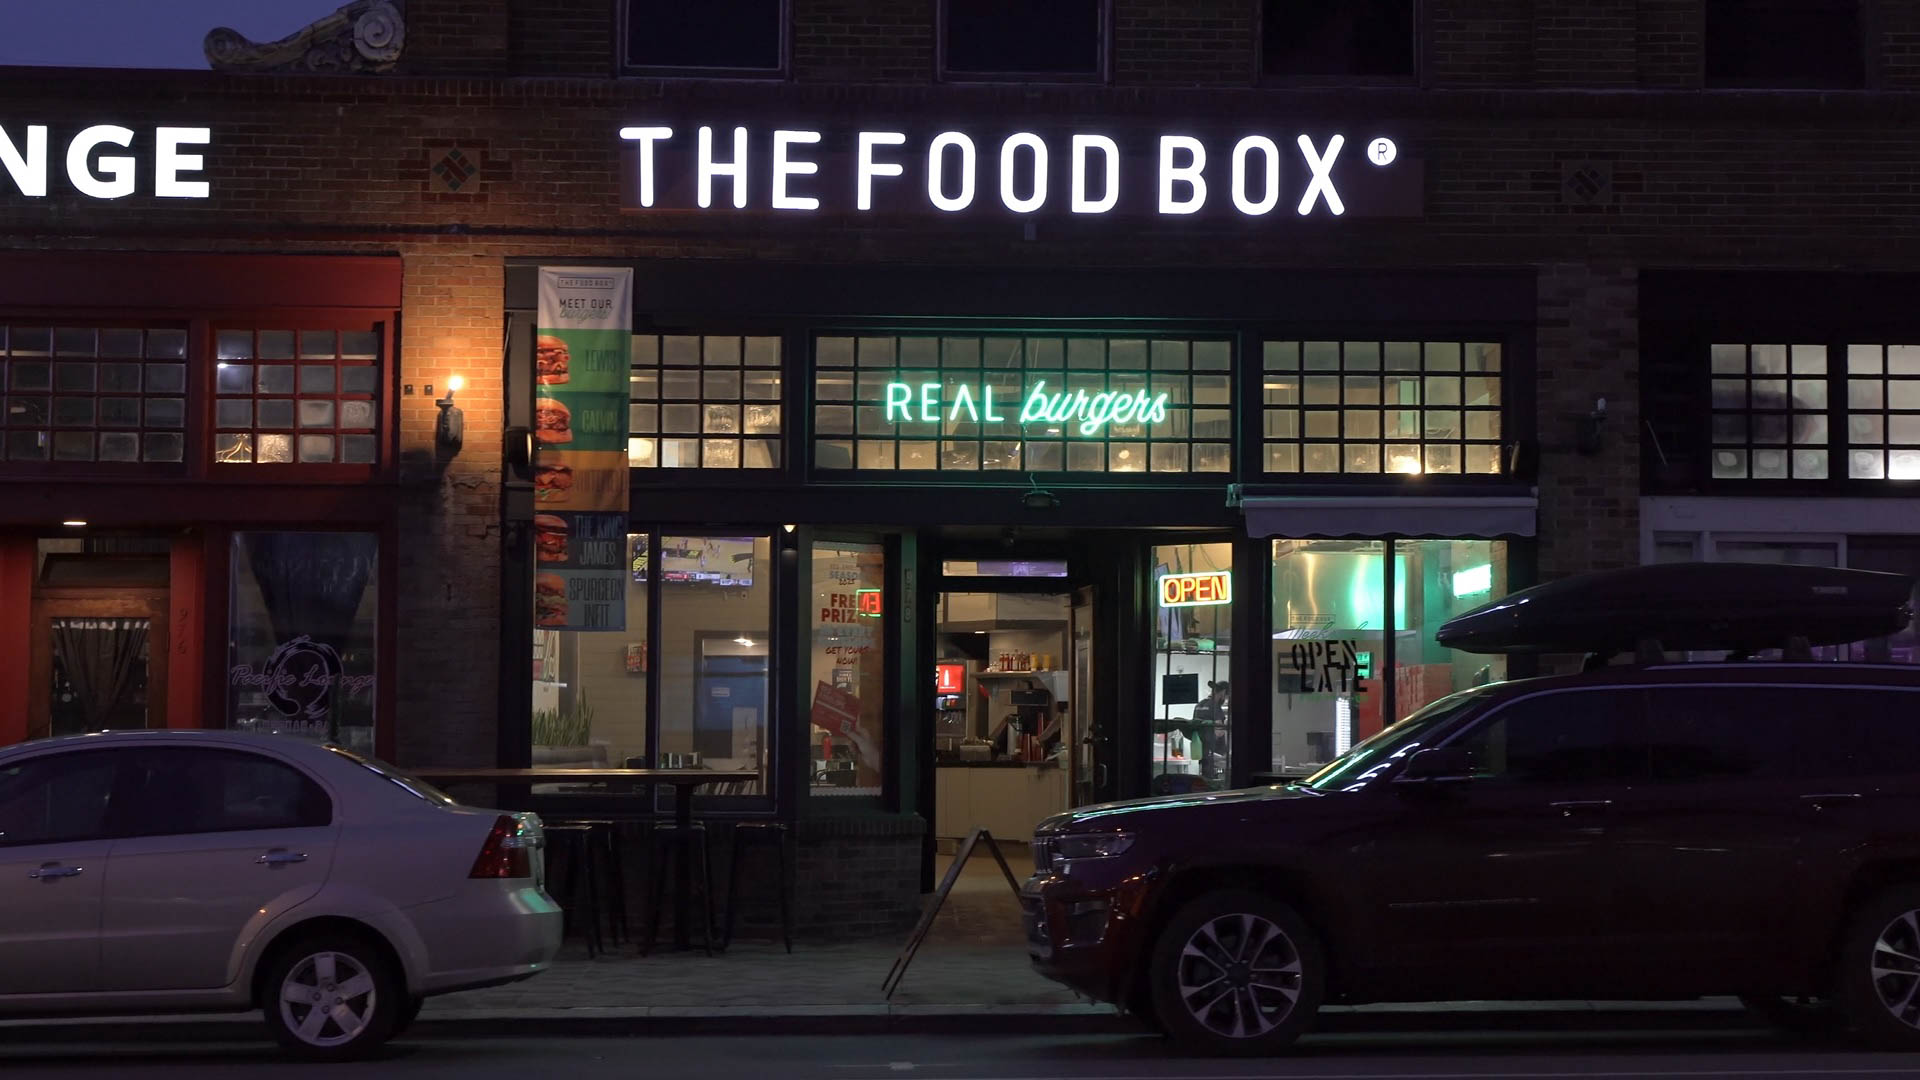 The Food Box, so much more than just a burger.